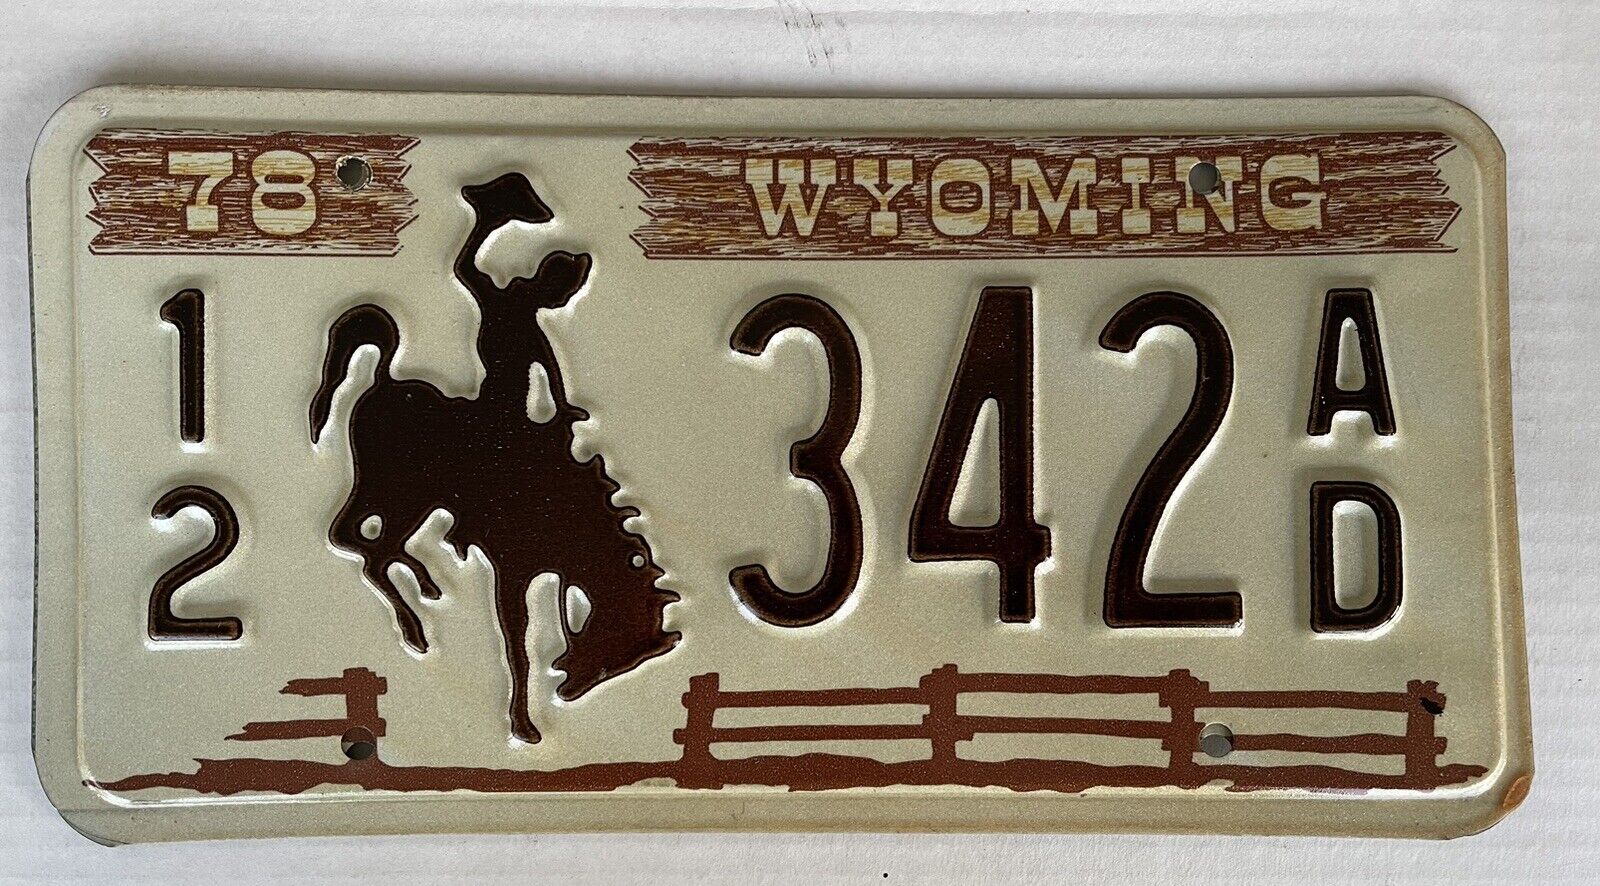 WYOMING 1978 License Plate 12 342 AD  Bucking Bronco  Vintage New Old Stock